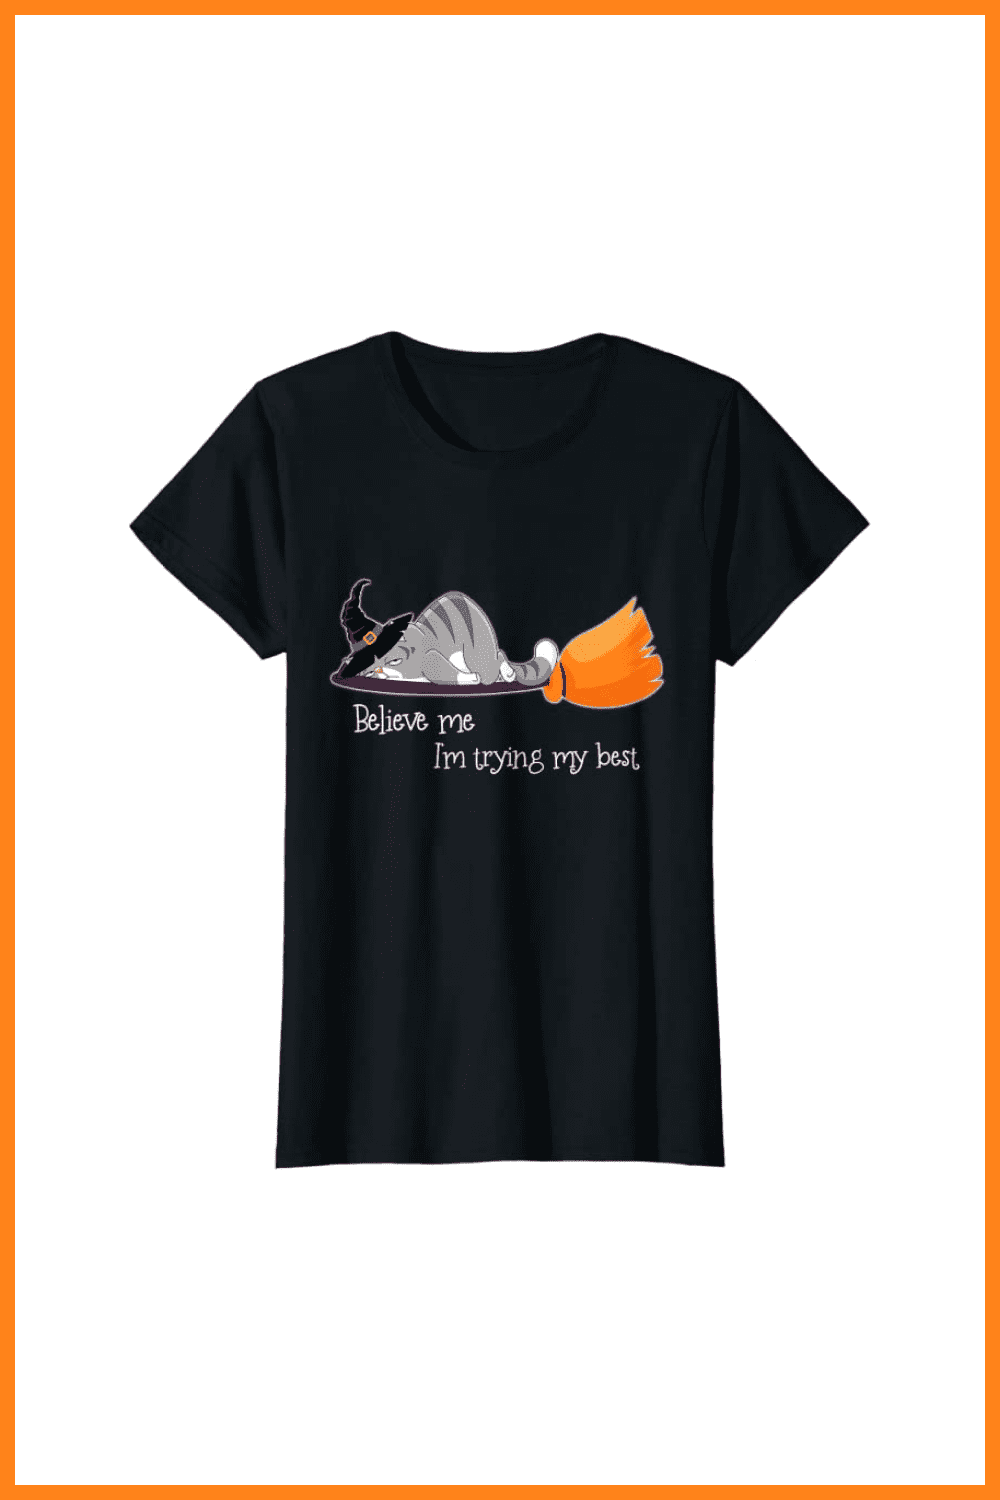 Black T-shirt with a sleeping cat on a broom.